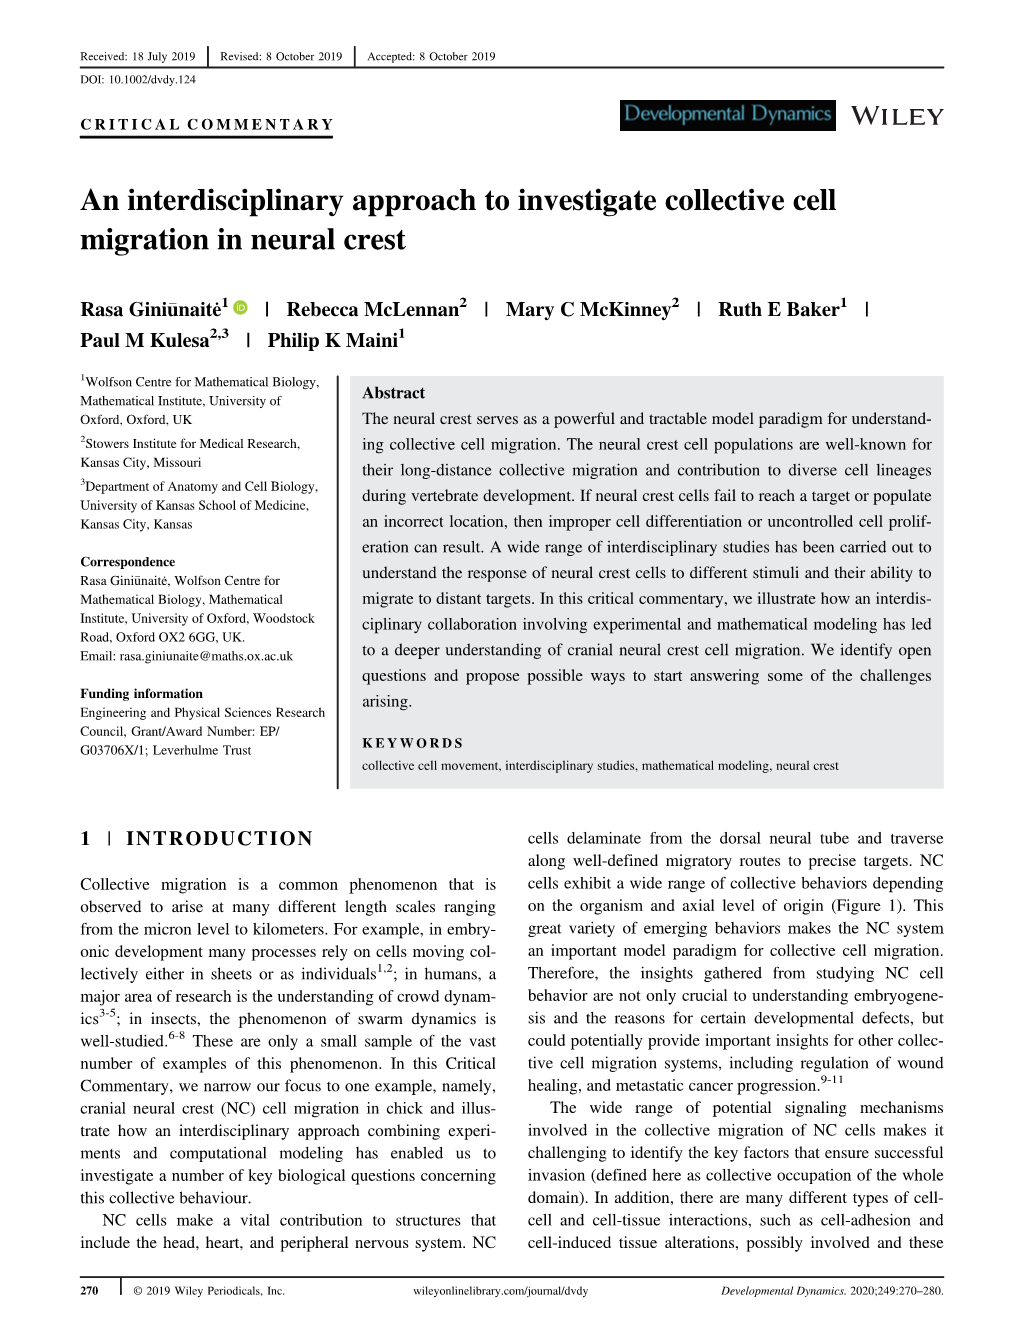 An Interdisciplinary Approach to Investigate Collective Cell Migration in Neural Crest